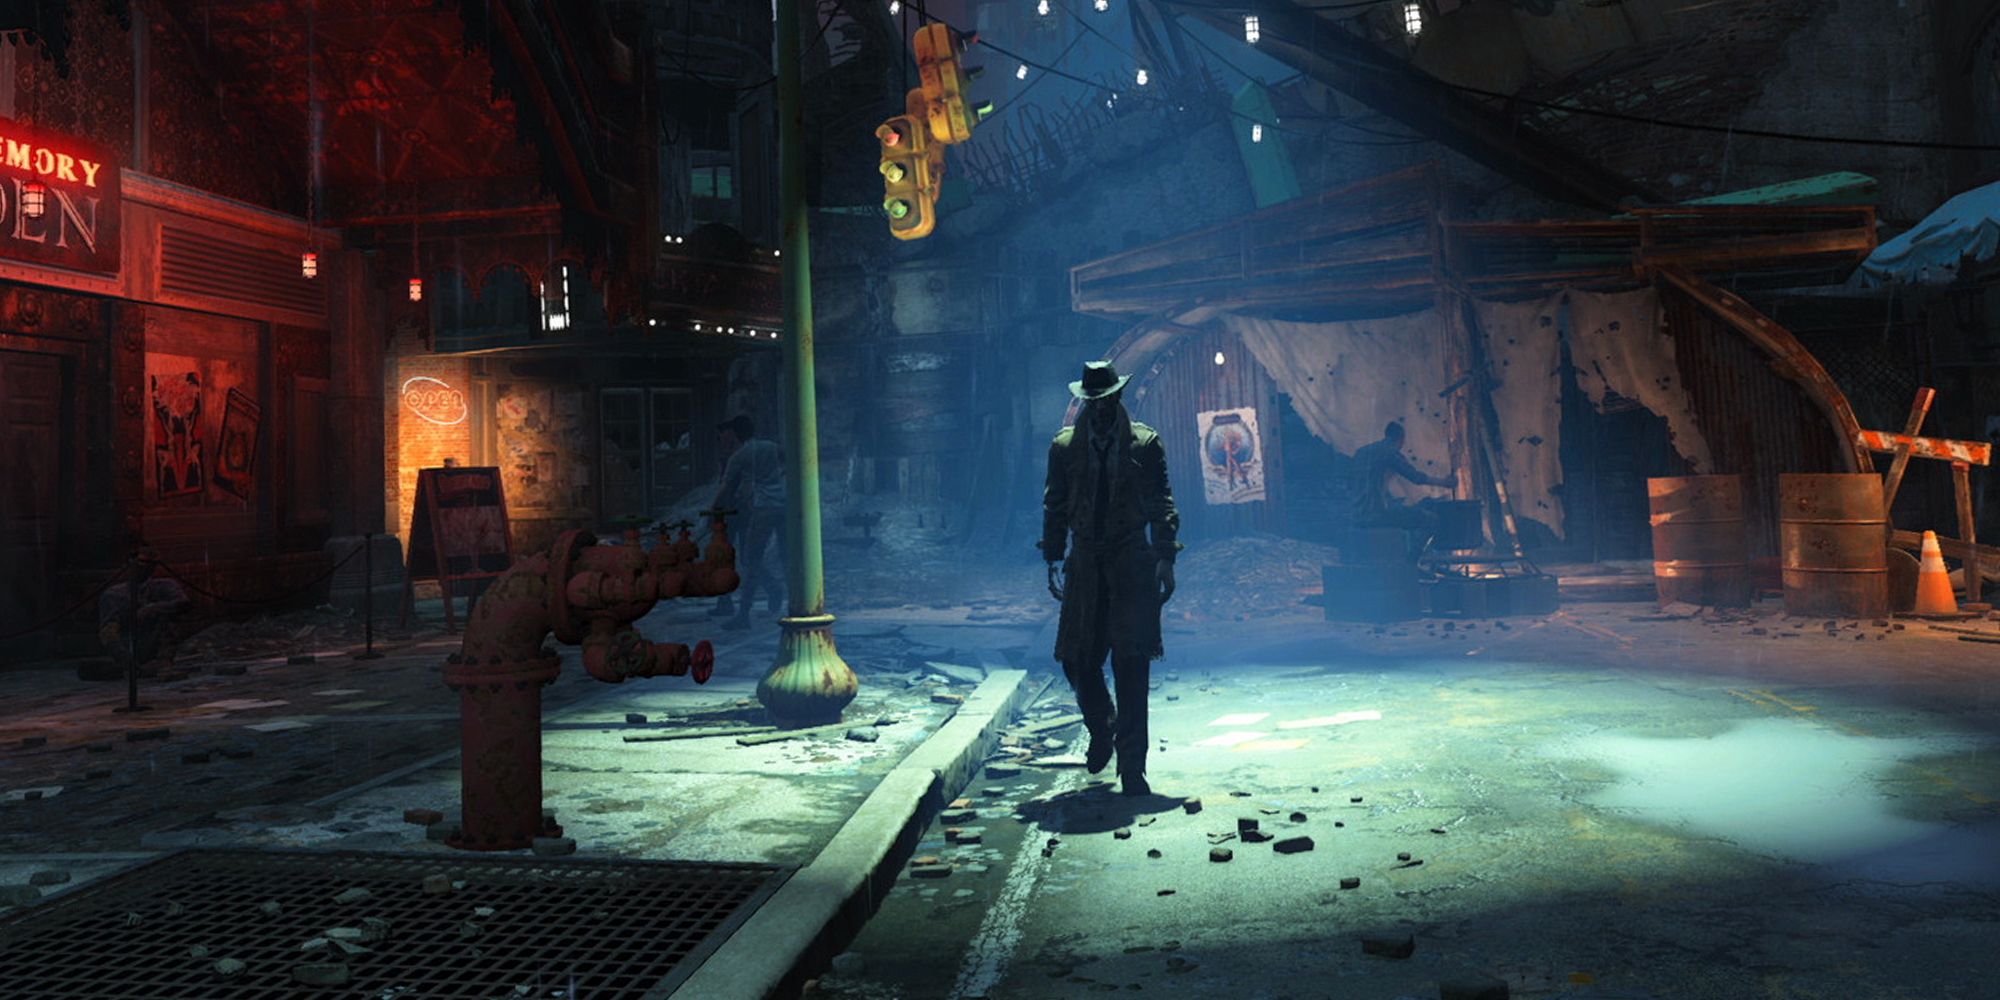 Fallout 4 detective. Nighttime, neon lights, character spotlights.